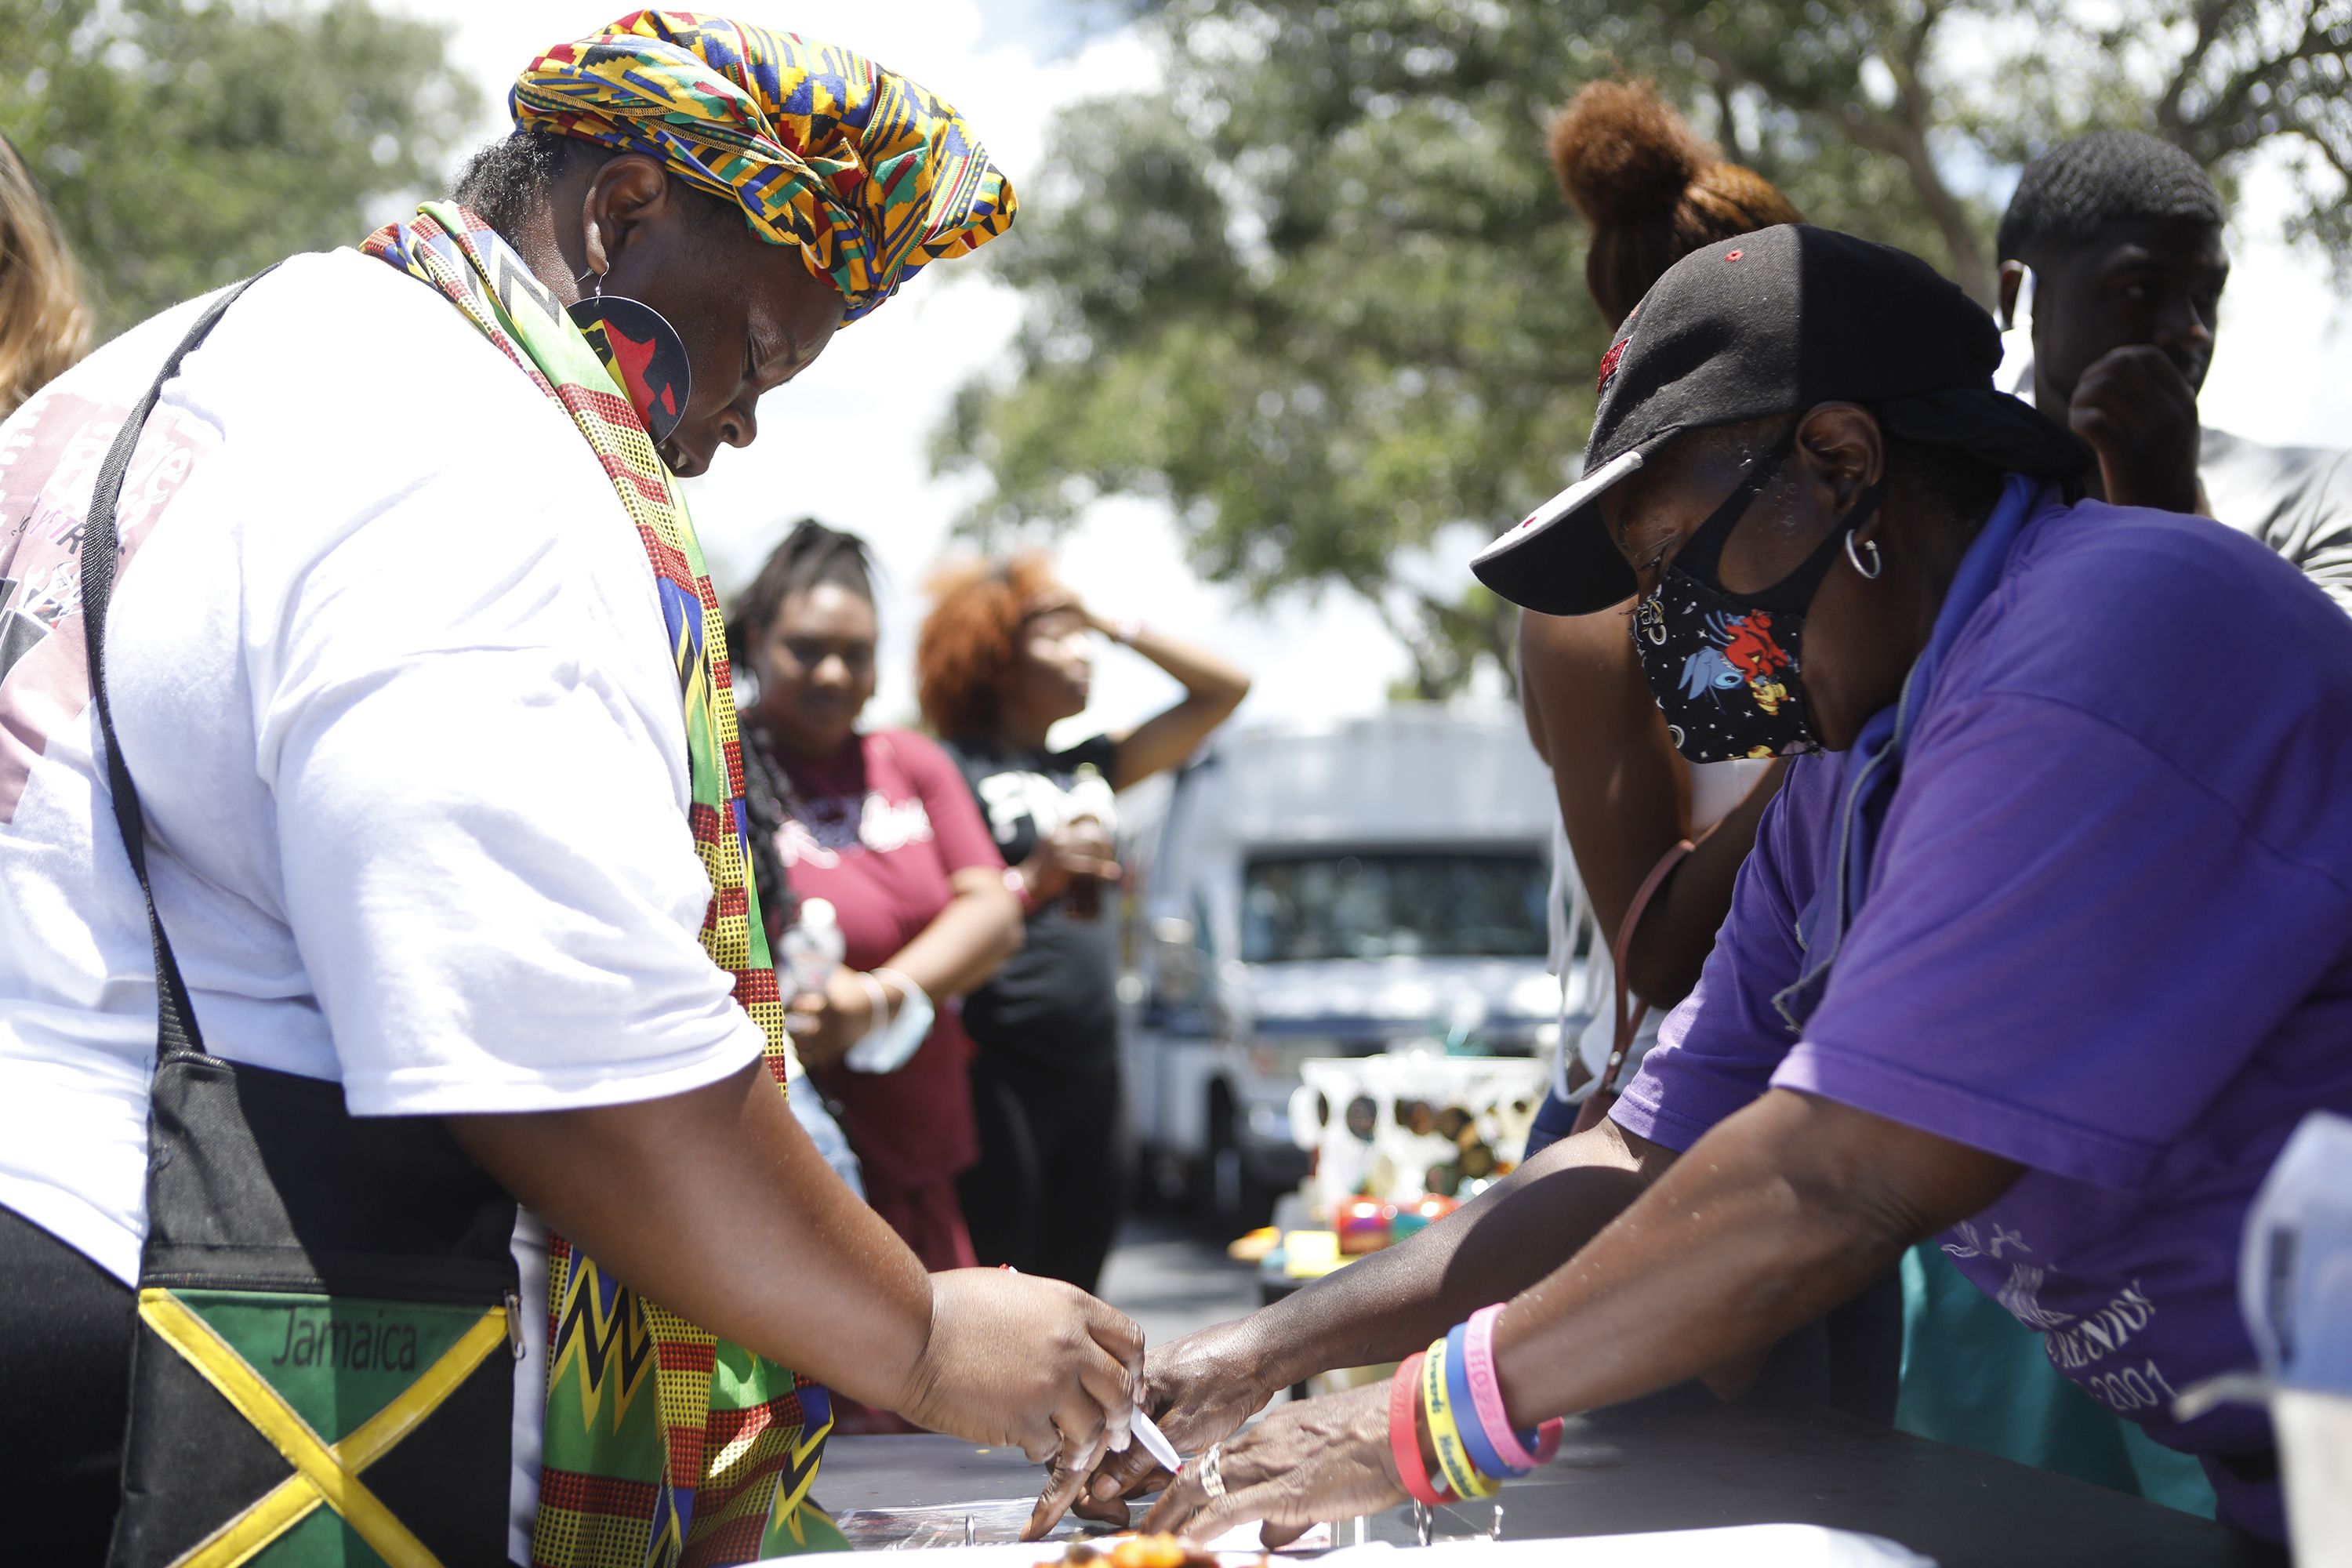 A woman shopping at a Juneteenth festival in Tampa Bay